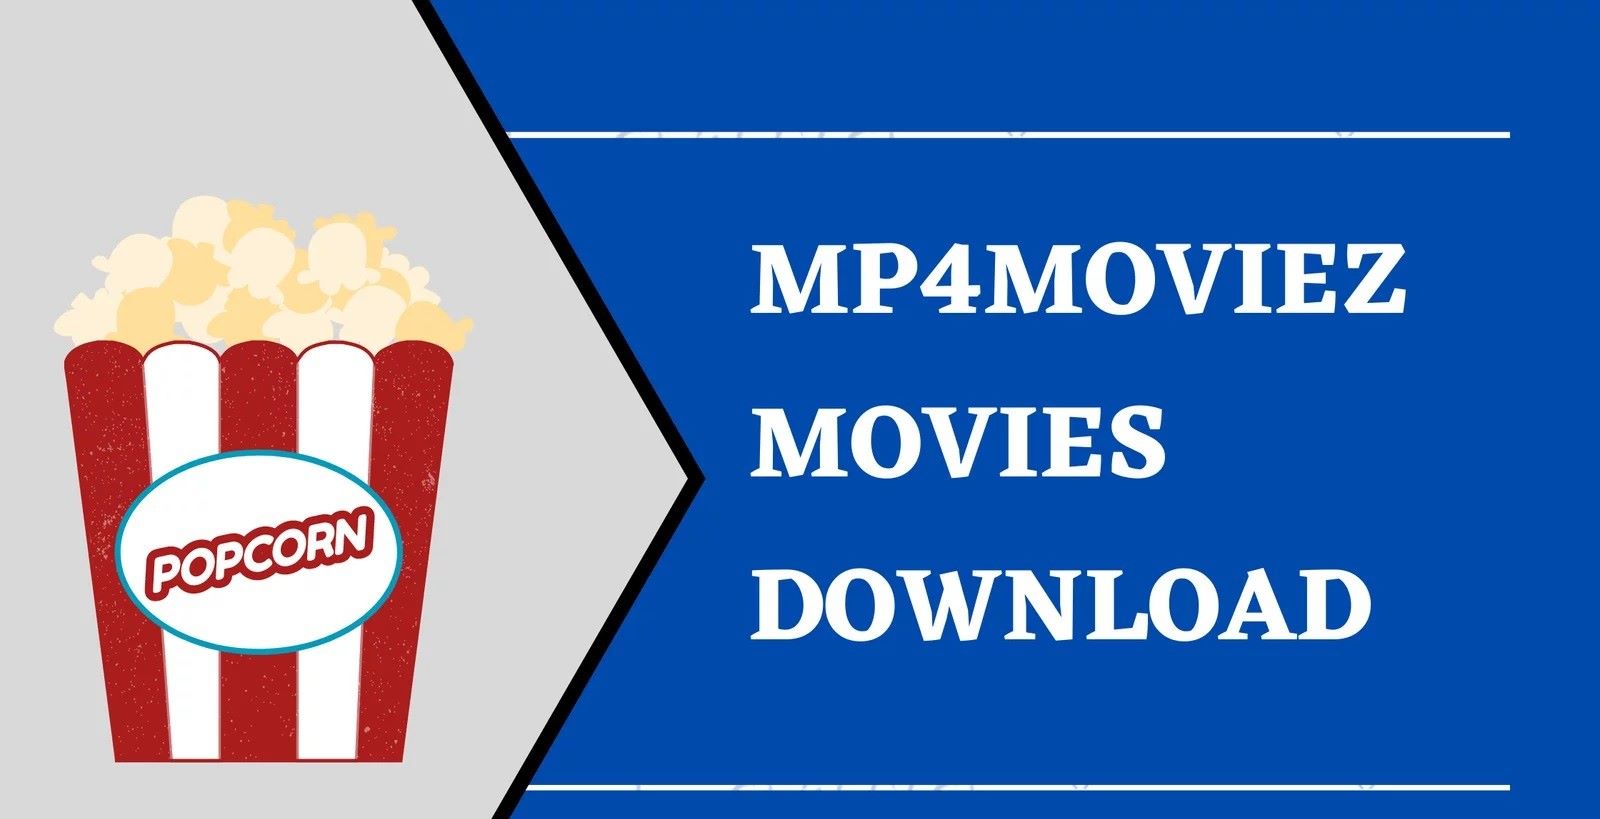 How To Download Movies To MP4